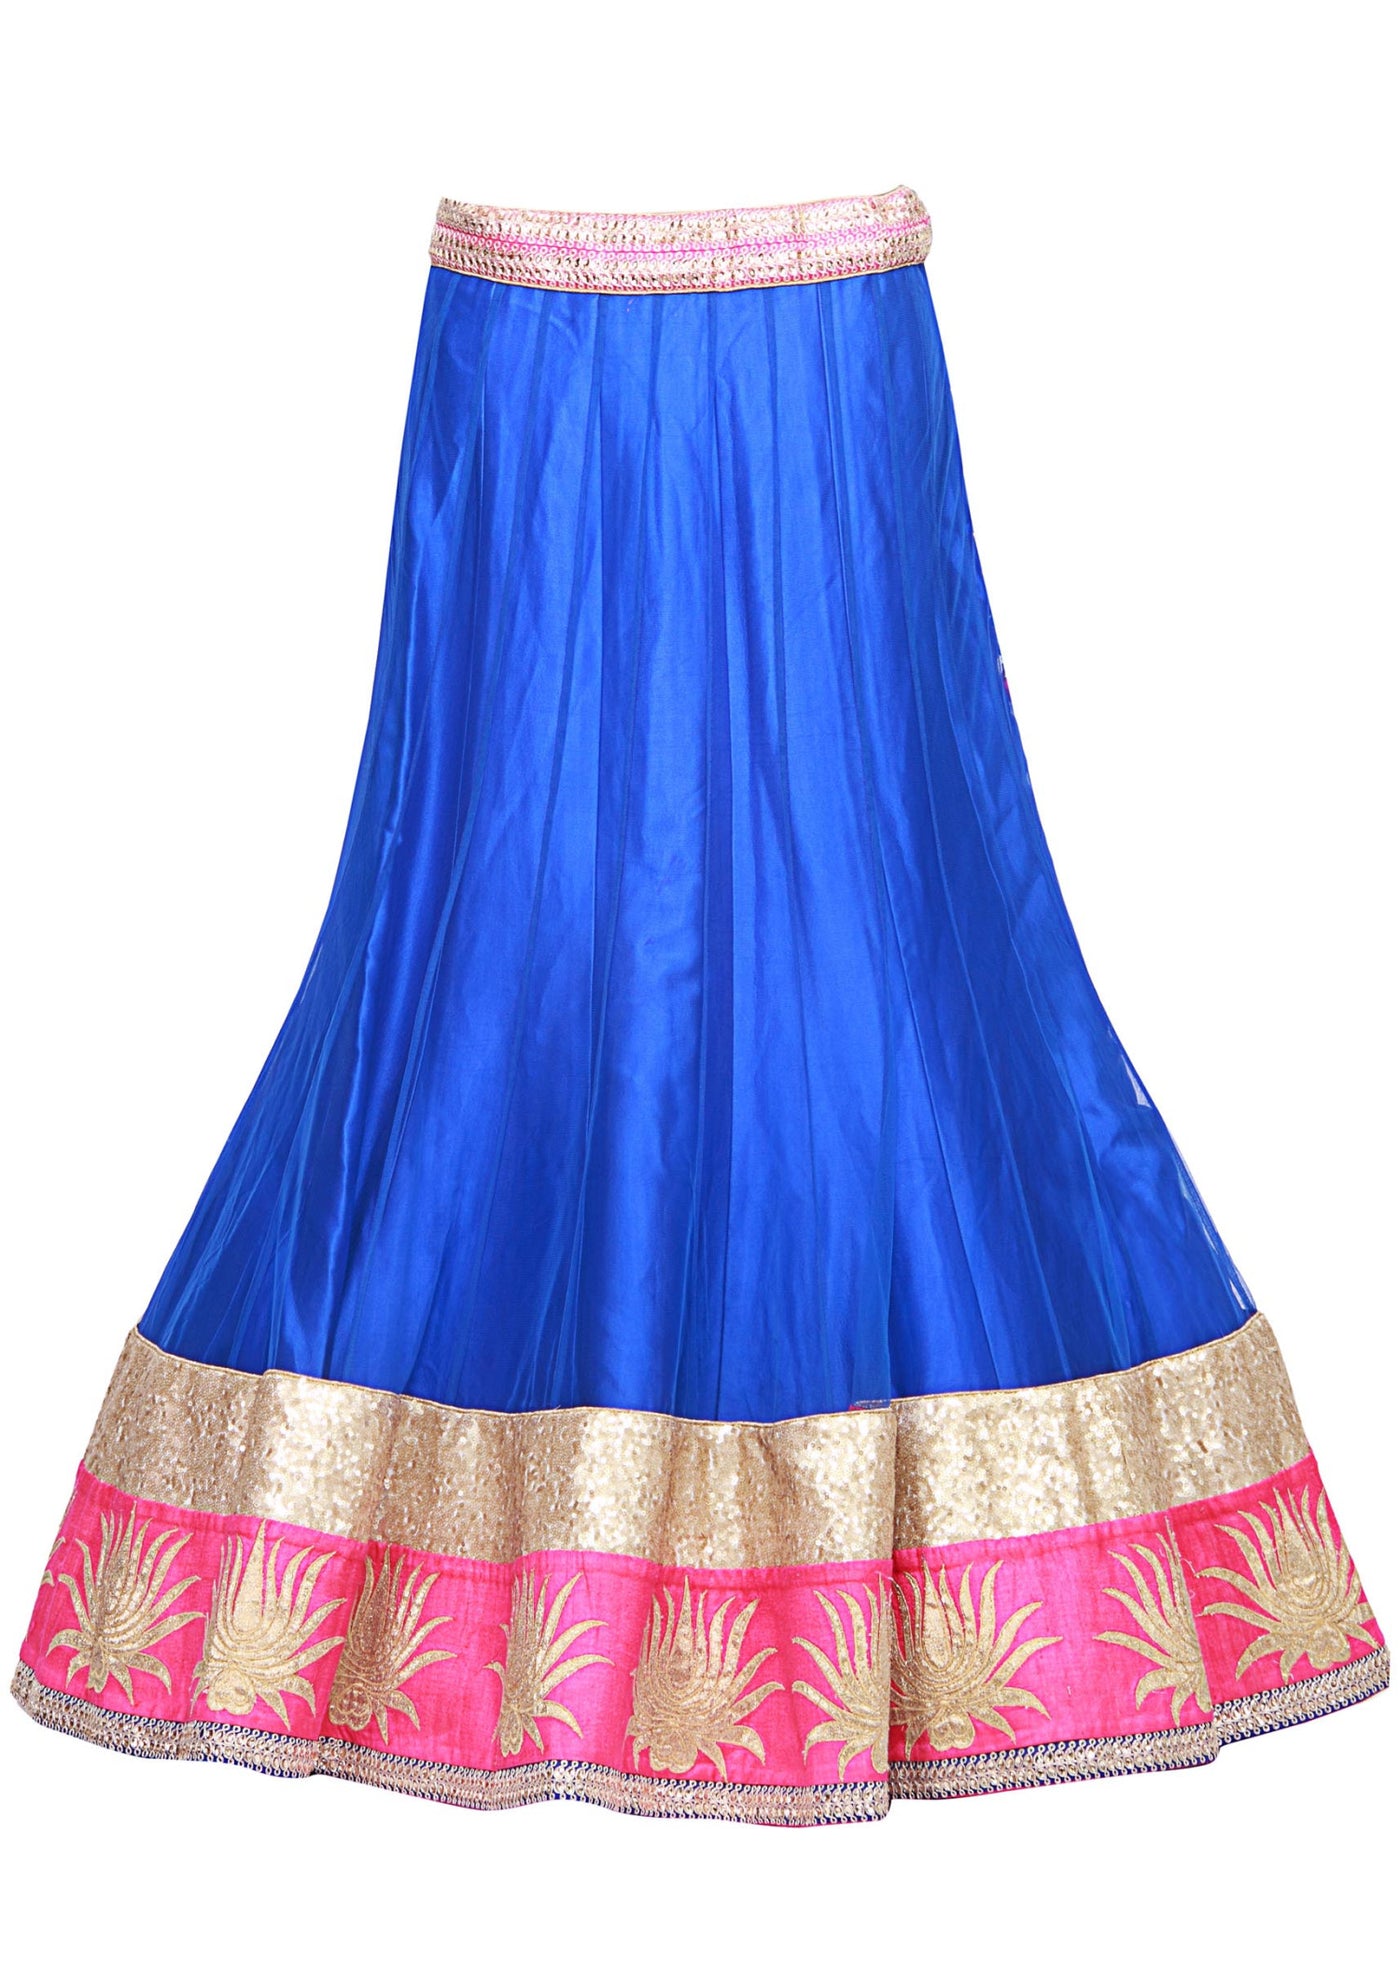 Royal blue lehenga - Indian Clothing in Denver, CO, Aurora, CO, Boulder, CO, Fort Collins, CO, Colorado Springs, CO, Parker, CO, Highlands Ranch, CO, Cherry Creek, CO, Centennial, CO, and Longmont, CO. Nationwide shipping USA - India Fashion X